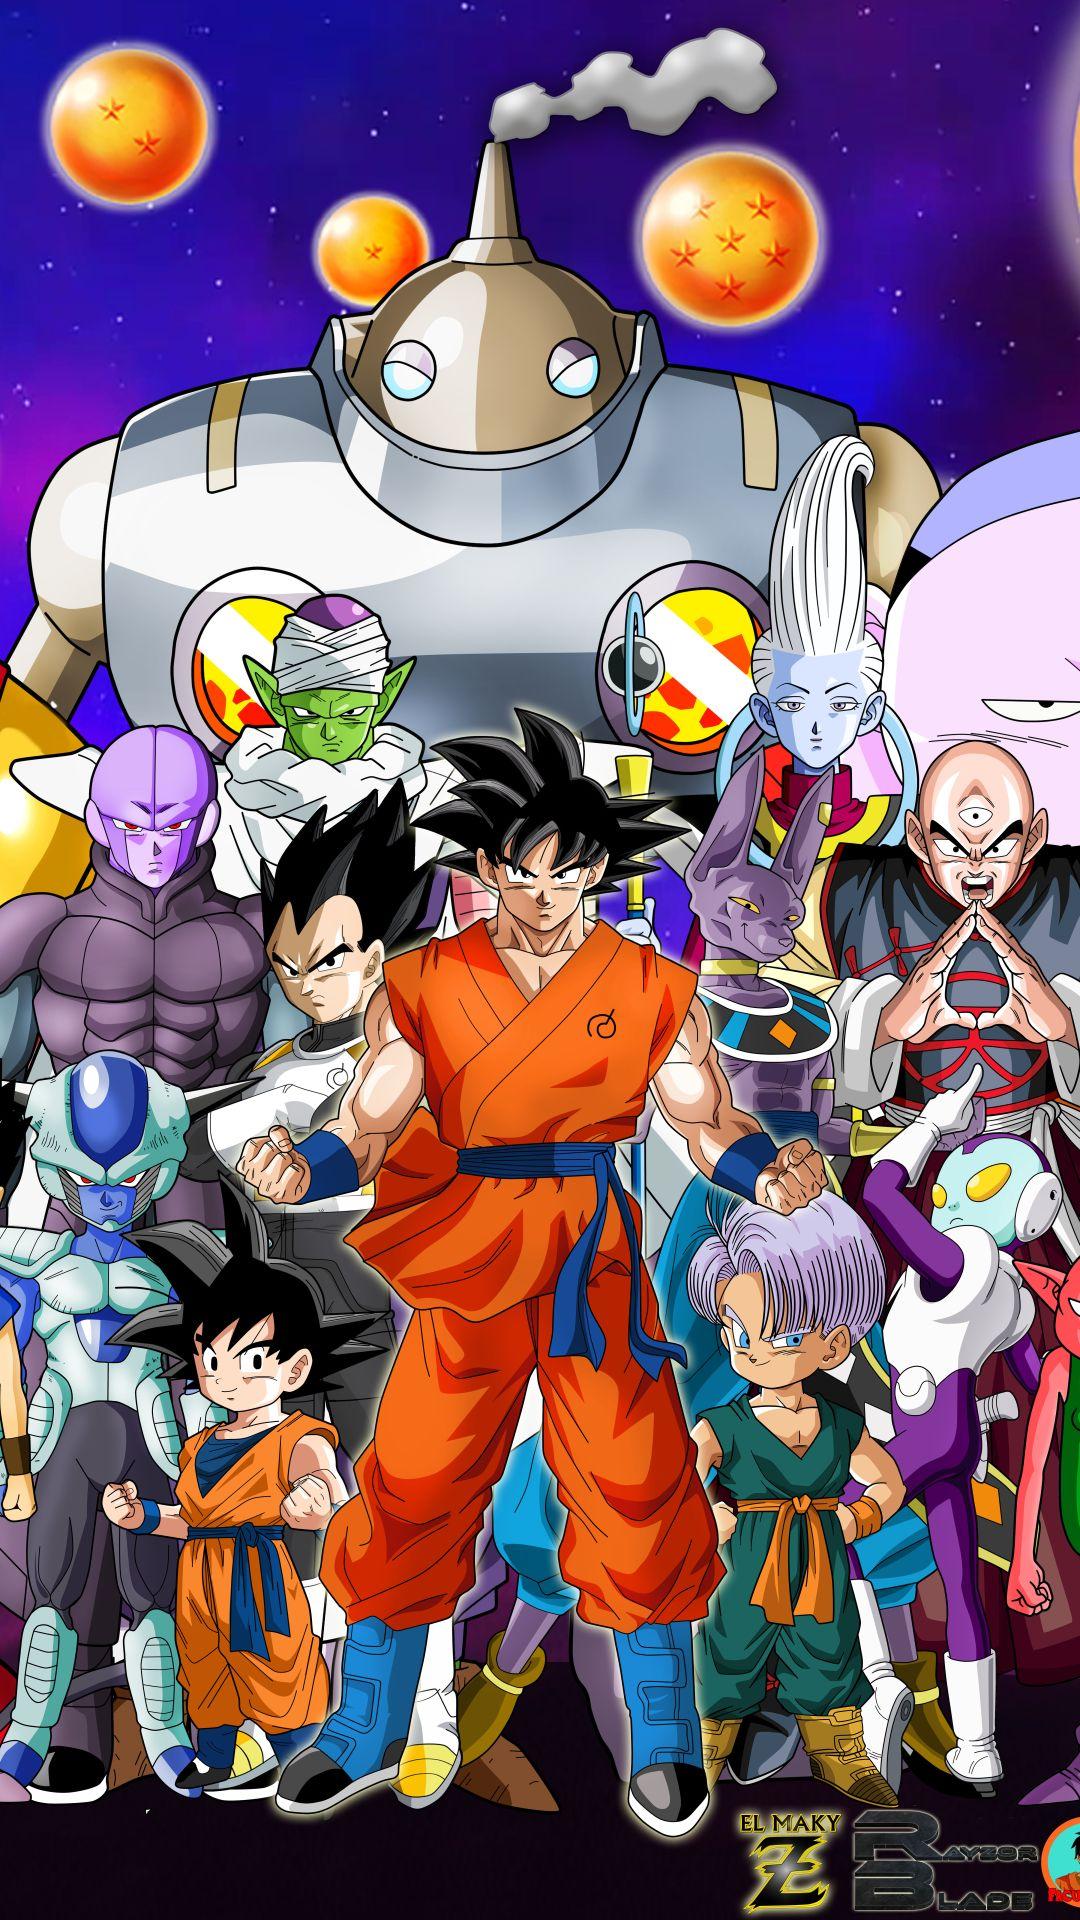 dragon ball z iphone wallpapers top free dragon ball z iphone backgrounds wallpaperaccess dragon ball z iphone wallpapers top